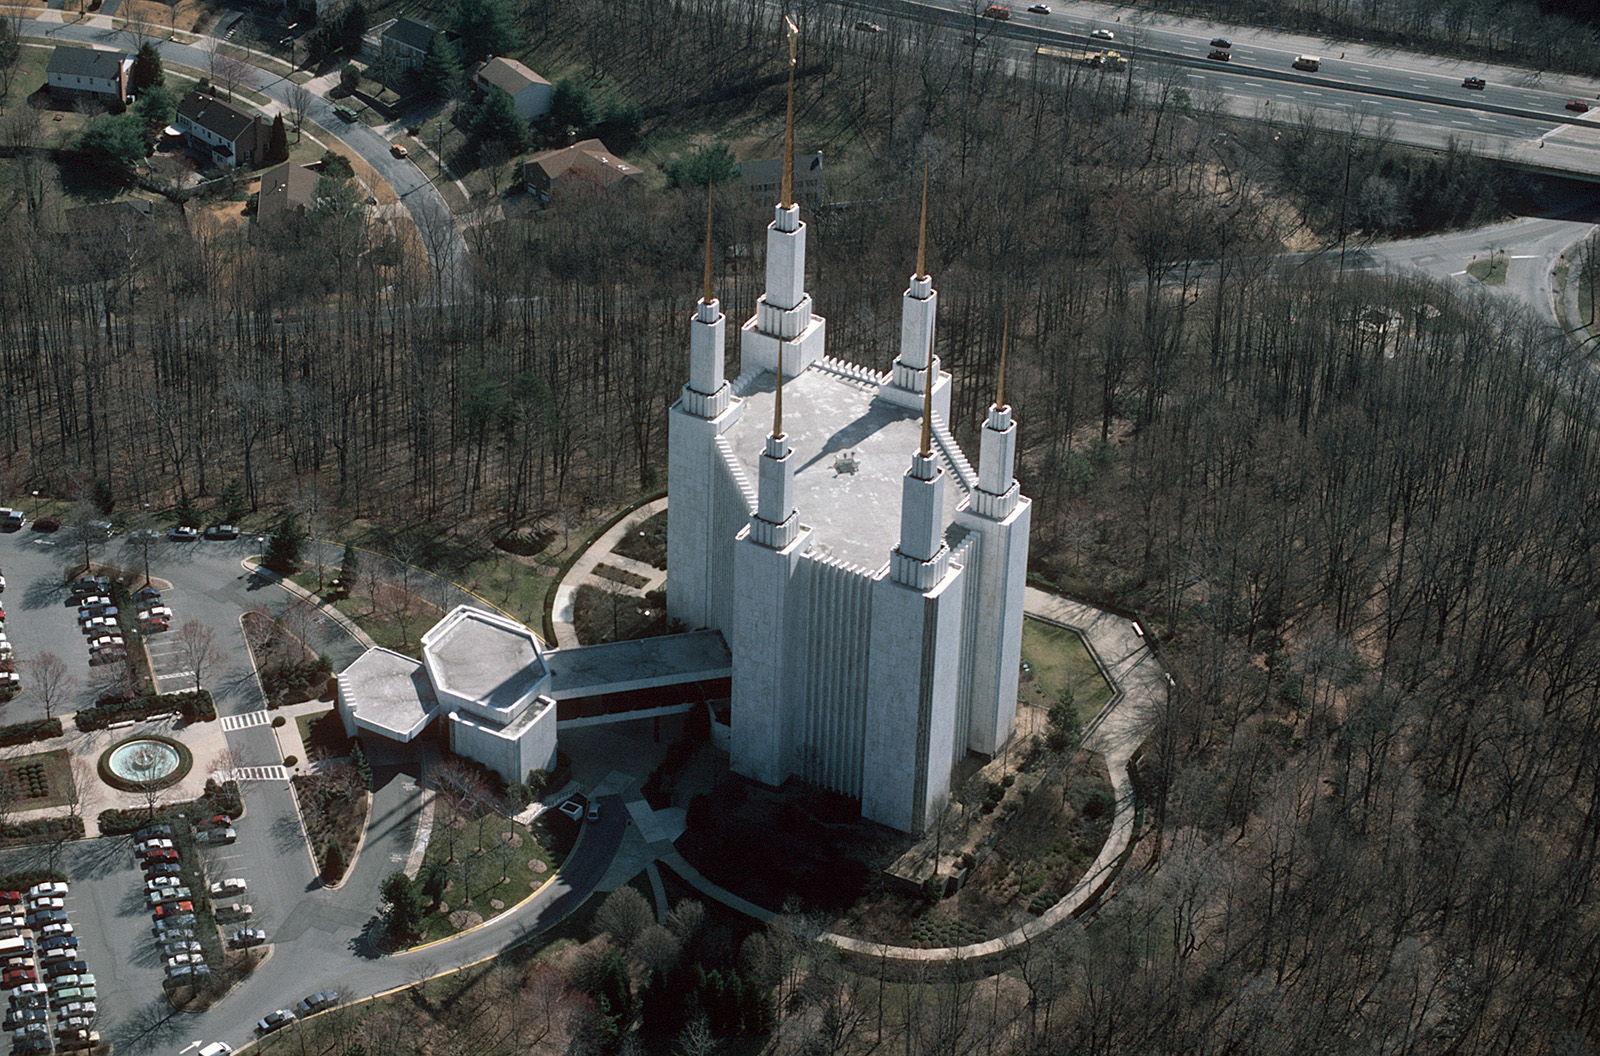 An aerial view of the D.C. Temple of the Church of Jesus Christ of Latter-day Saints in Washington, D.C., in 1988. Photo by MSGT Ken Hammond/National Archives/Creative Commons